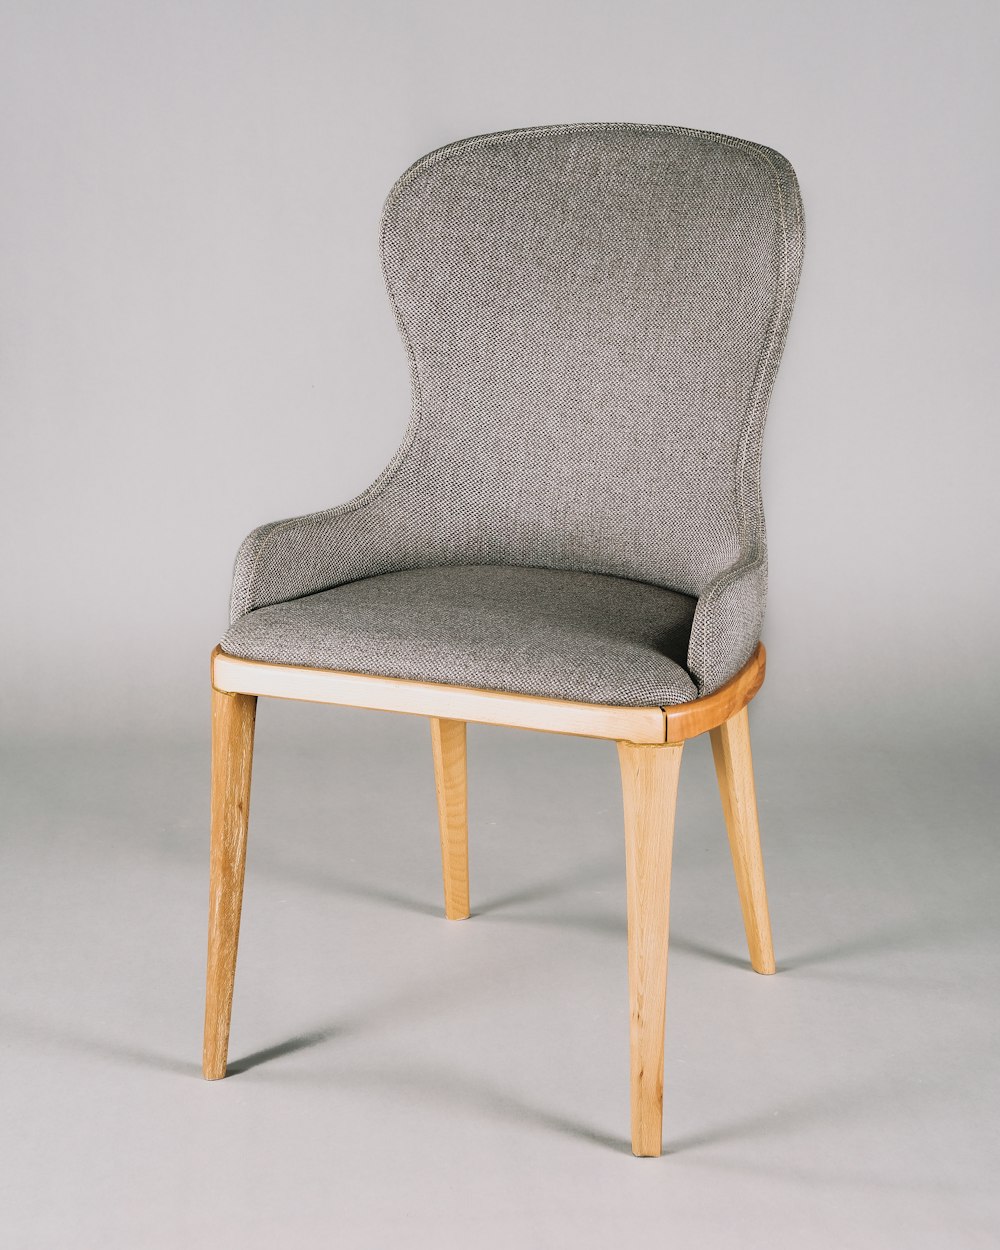 gray and white padded chair